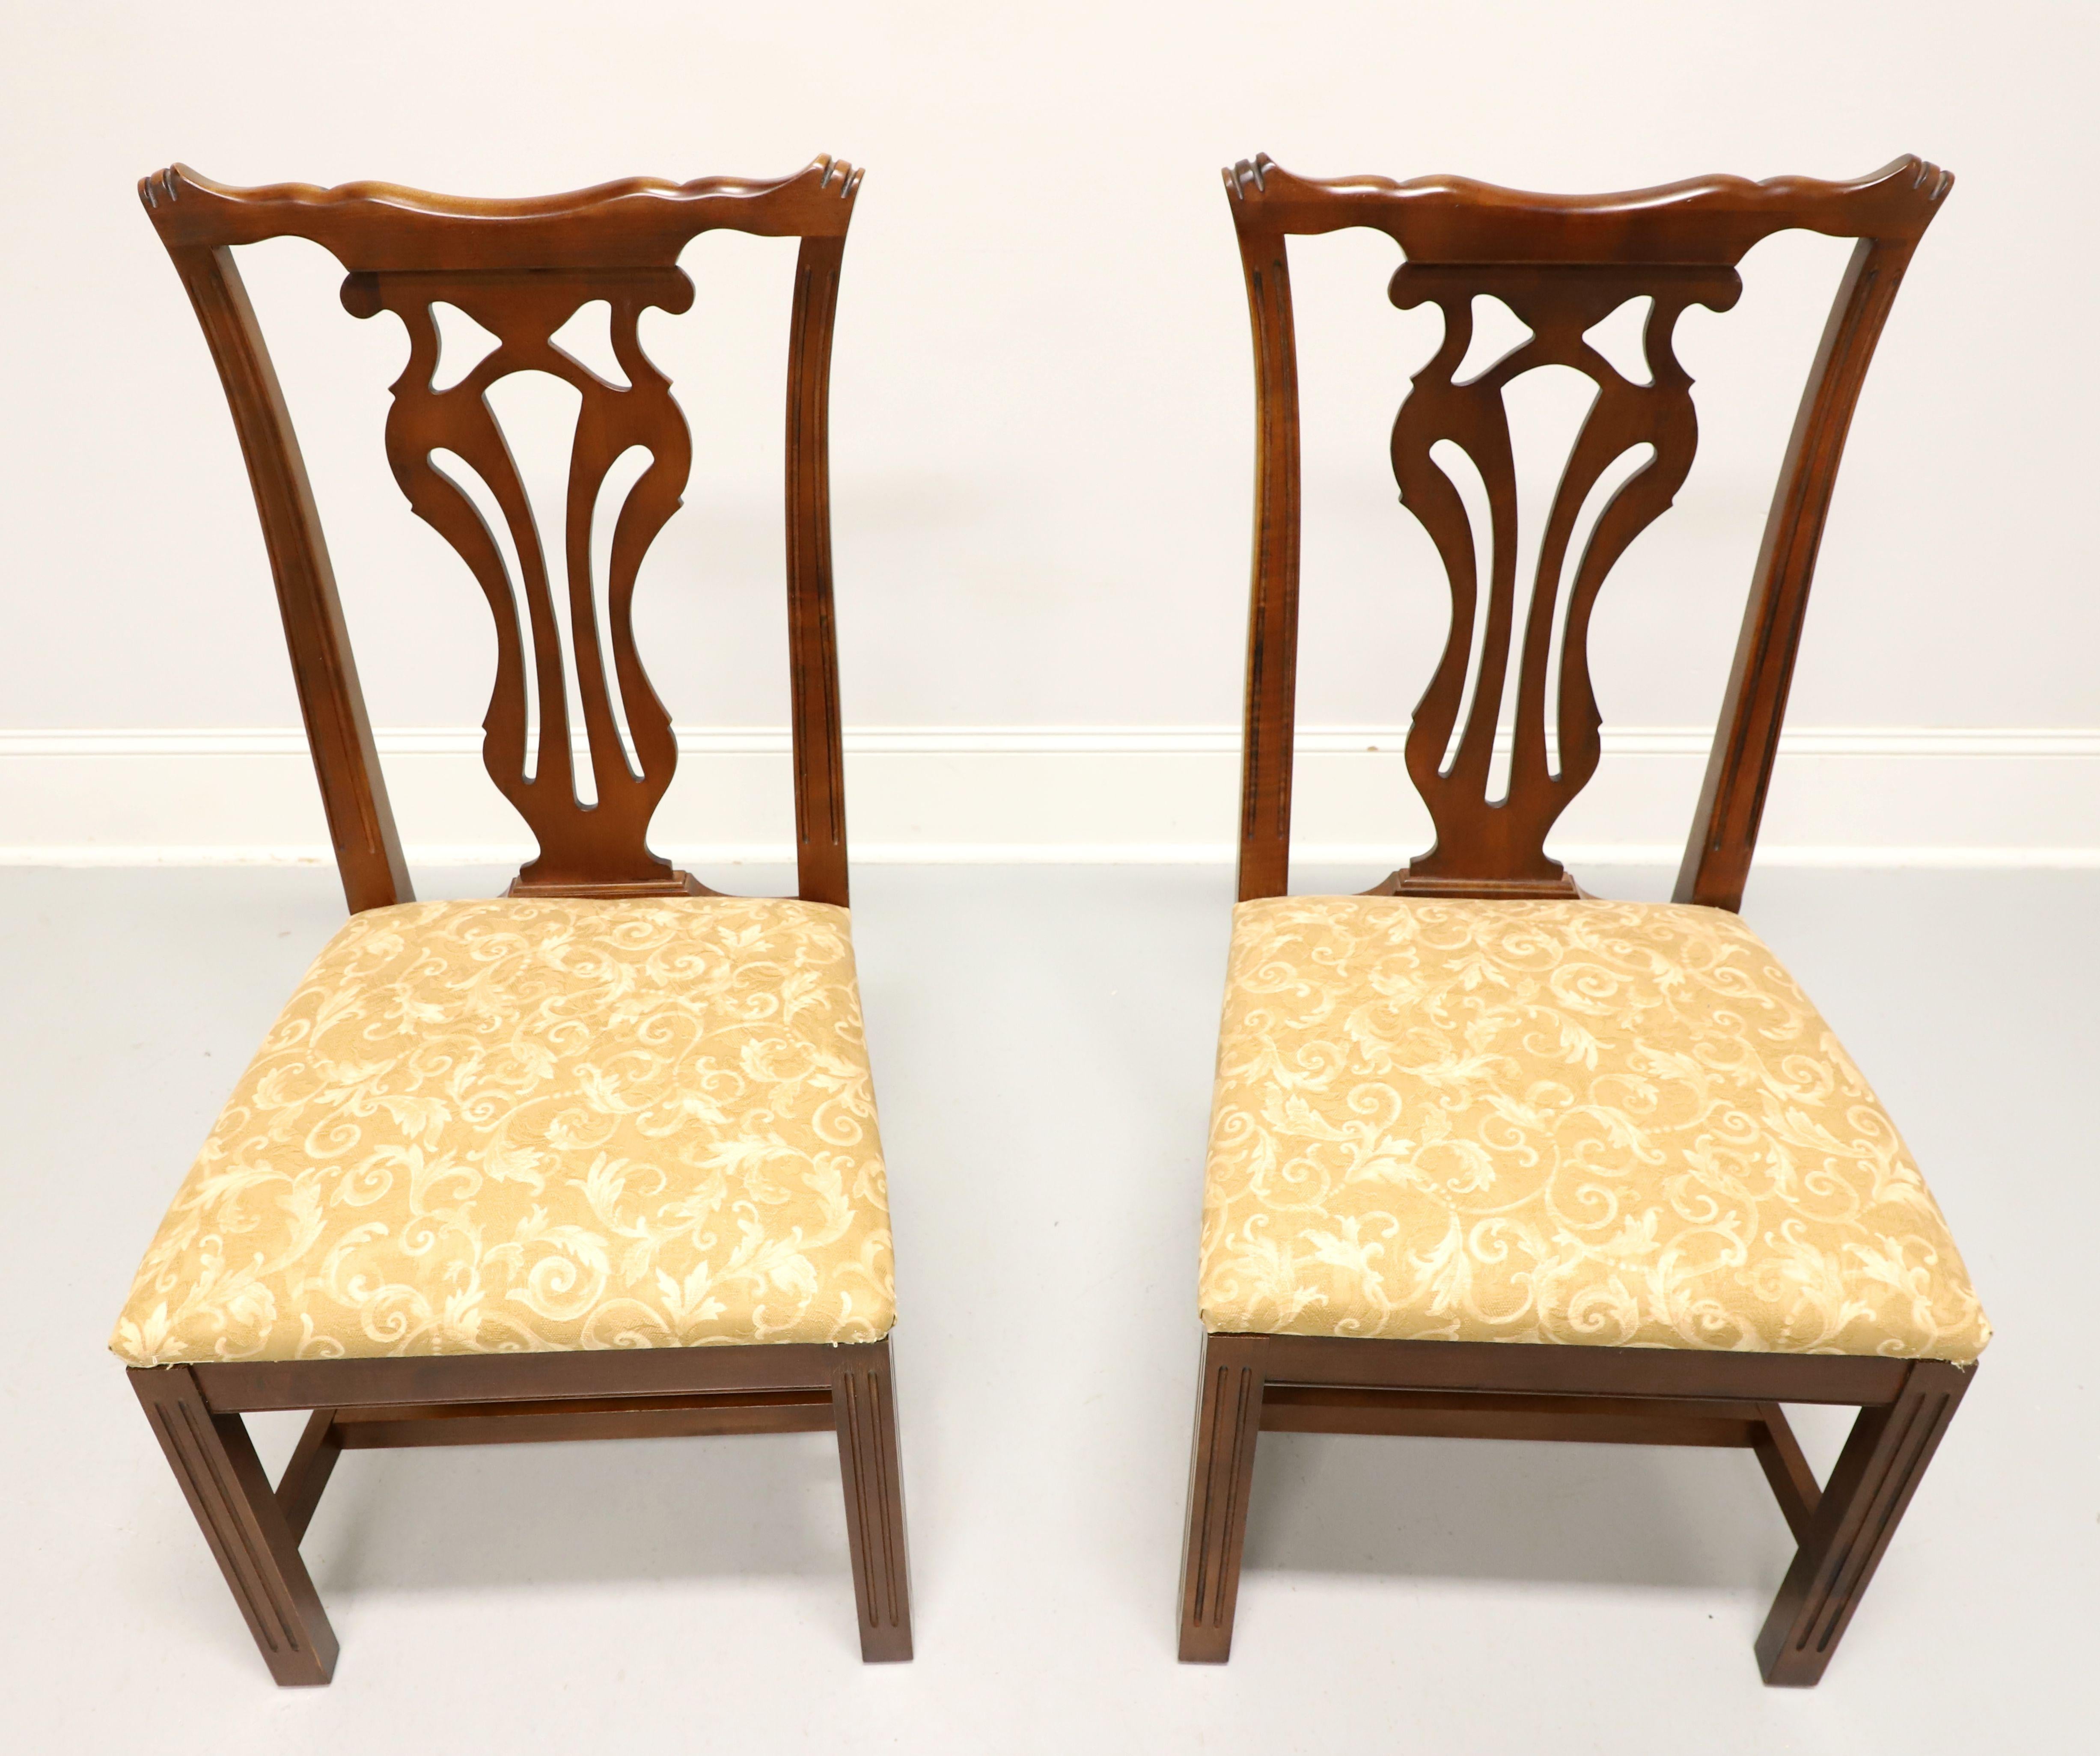 A pair of dining side chairs in the Chippendale style by Knob Creek. Mahogany with carved backrests, gold brocade fabric upholstered seat, stretcher base, and straight legs. Made in the USA, in the late 20th Century.

Measures:  Overall: 20w 22d